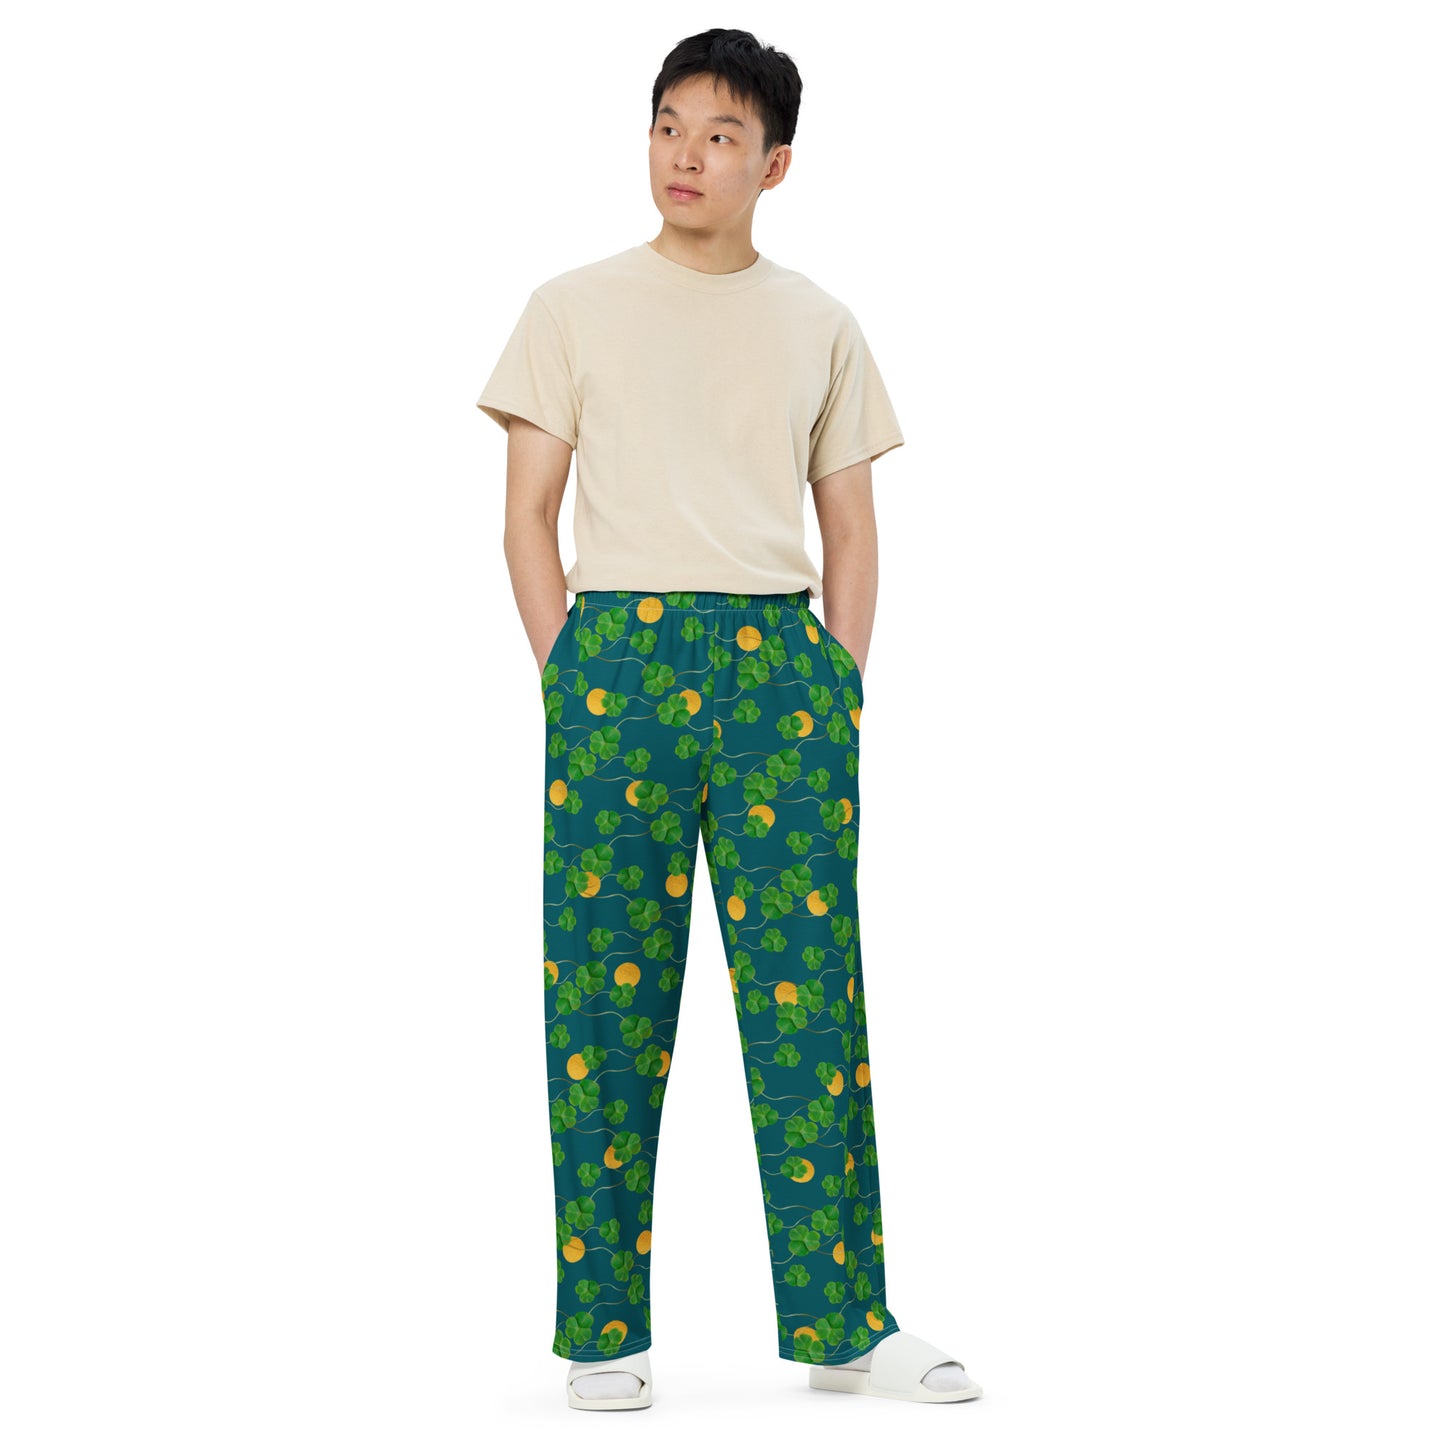 Unisex wide leg pants with side pockets, elastic waistband and drawstring.  Design features pattern of three-leaf clover and lucky gold coins on a blue-green background. Shown on male model.